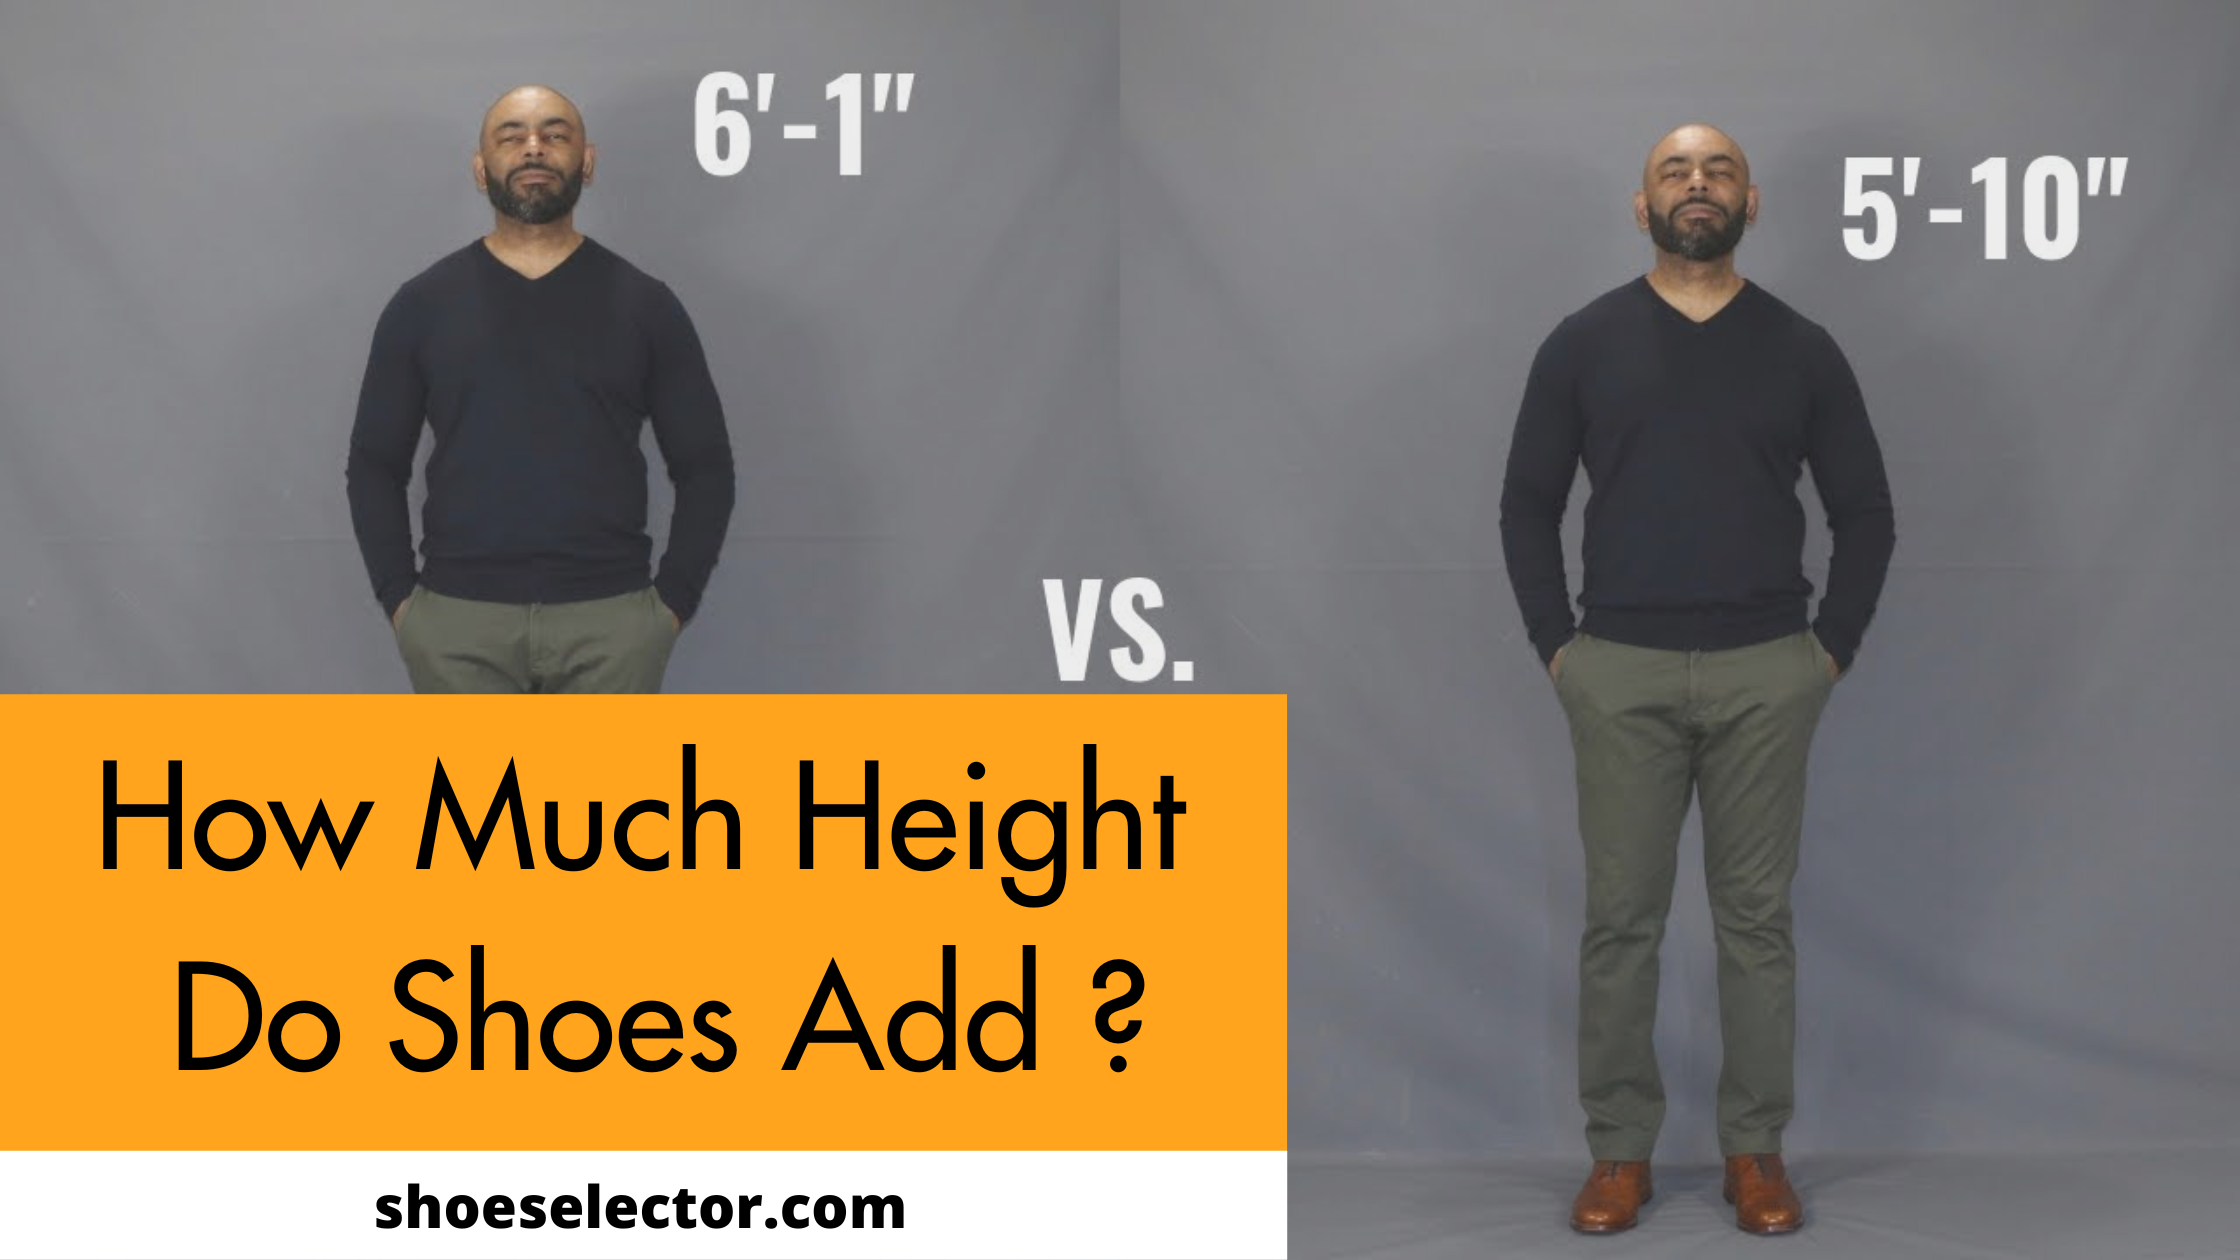 How Much Height do Shoes Add? - Simple Guide